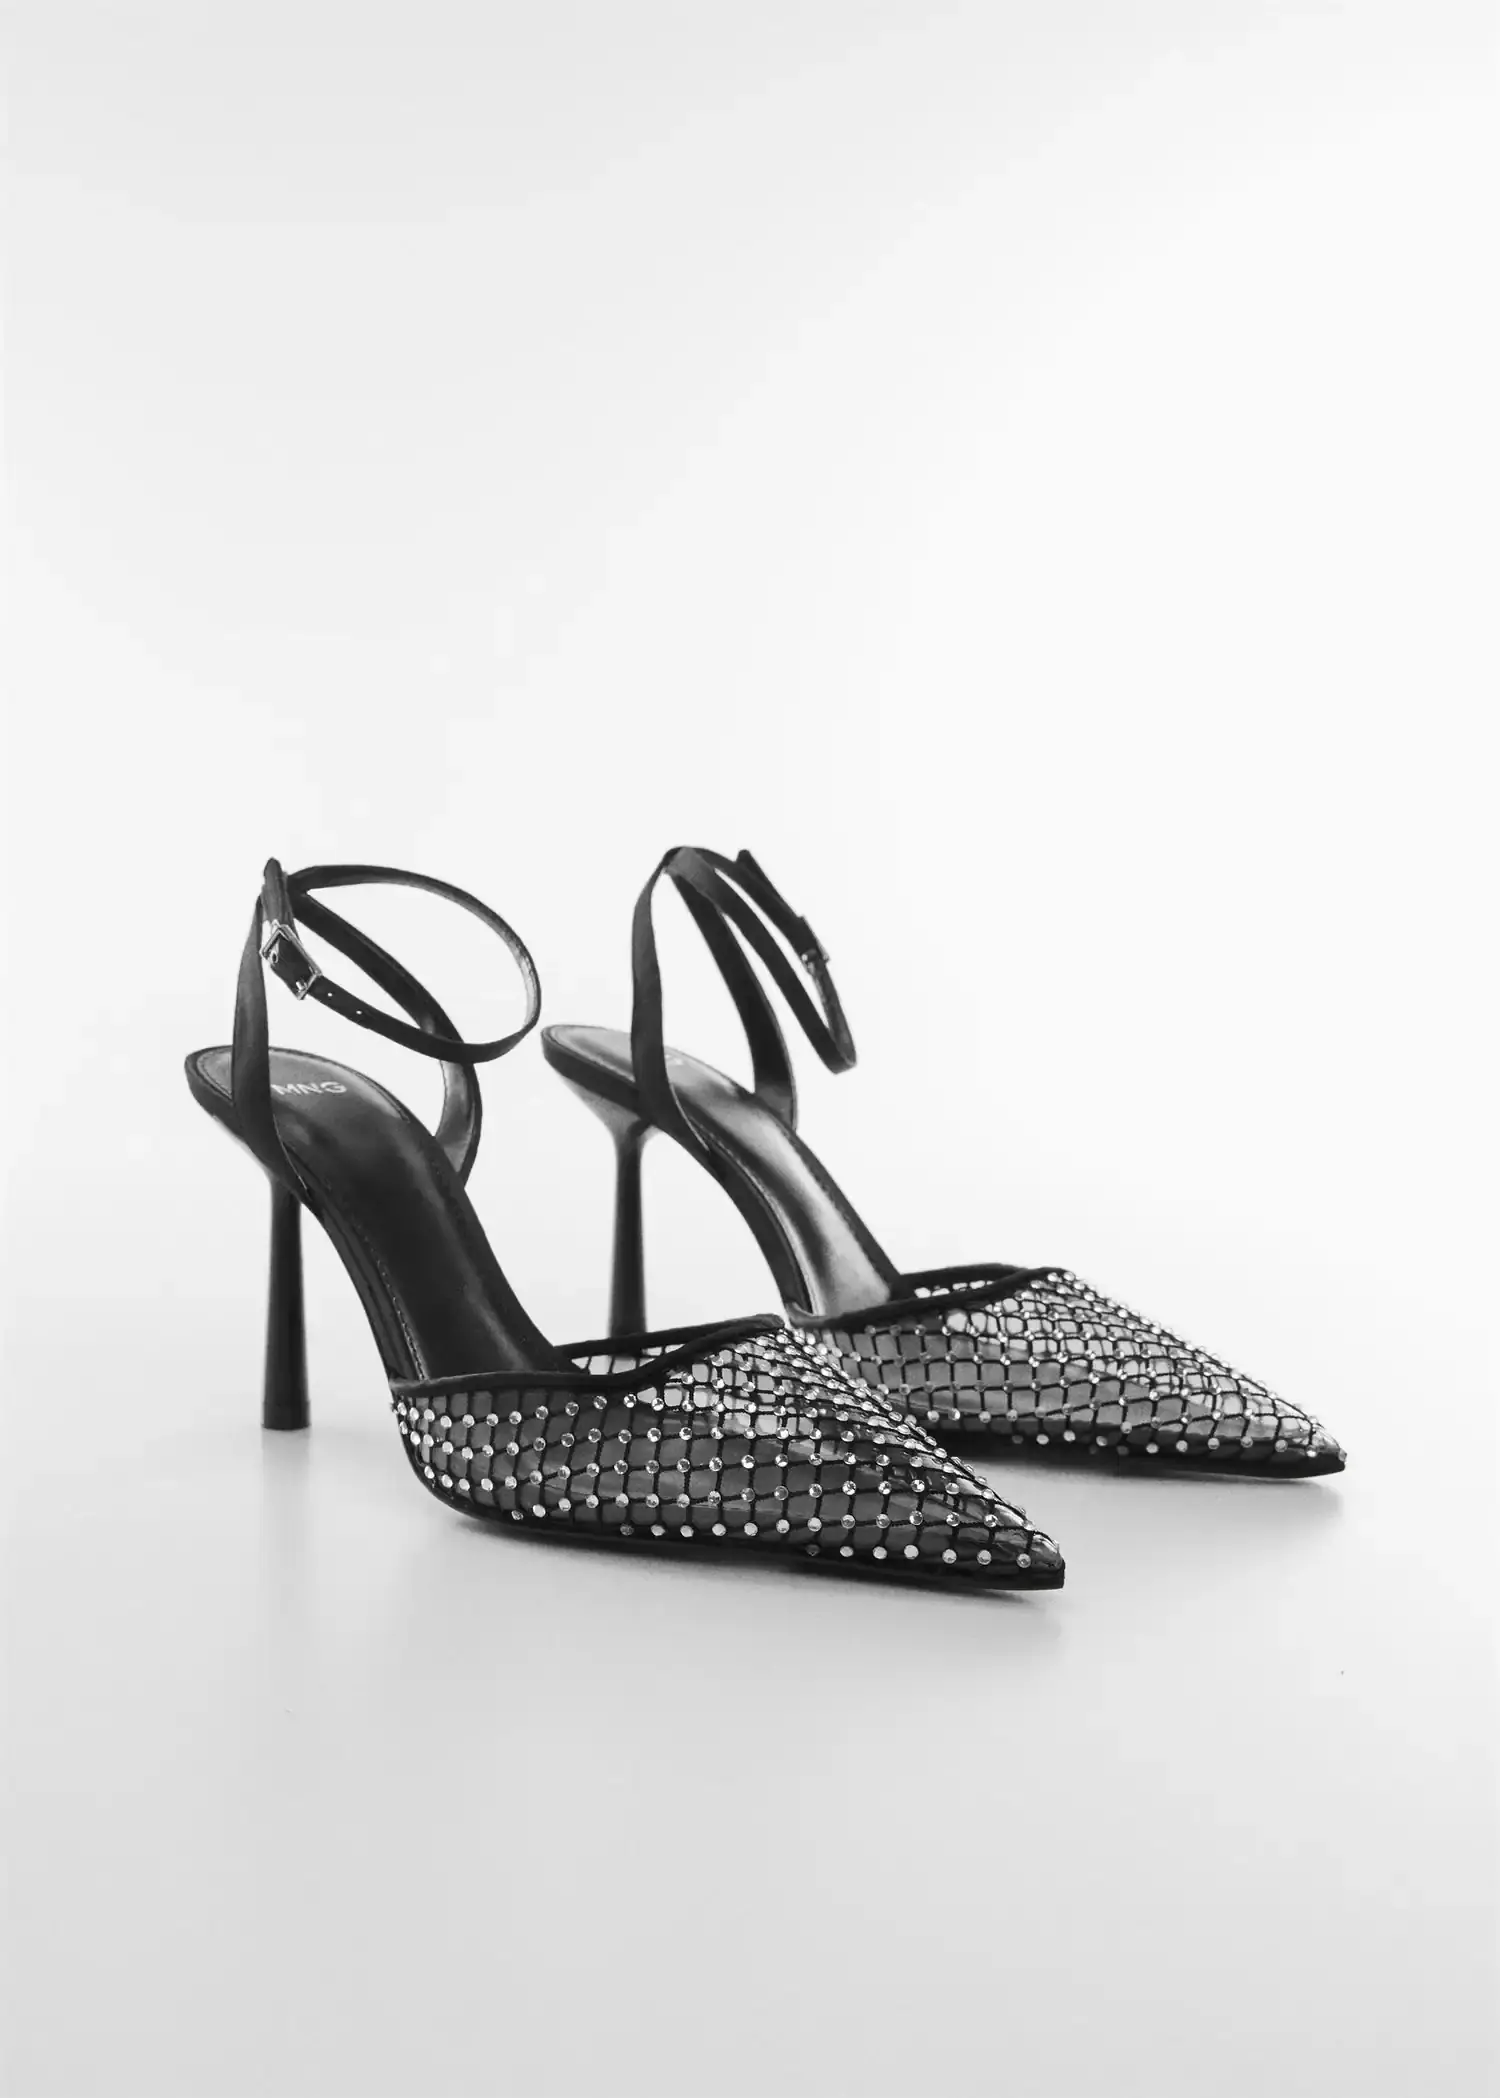 Mango Rhinestone mesh shoes. a pair of black high heel shoes on a white surface. 